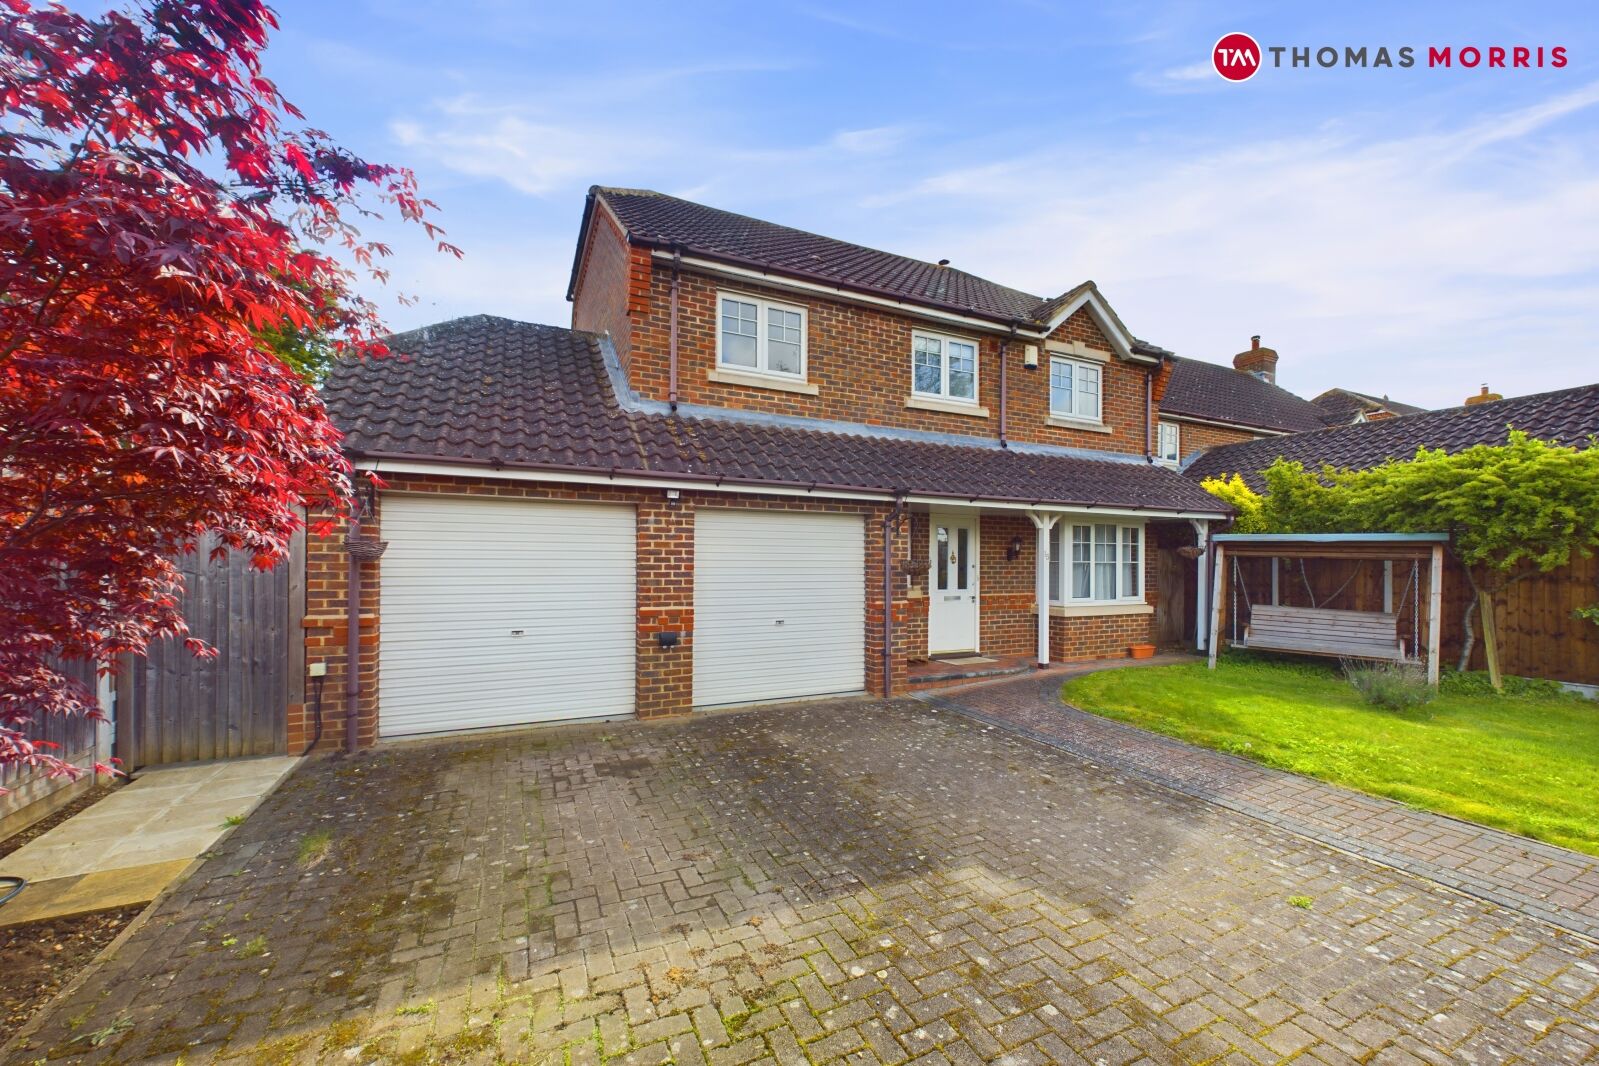 4 bedroom detached house for sale The Avenue, Biggleswade, SG18, main image